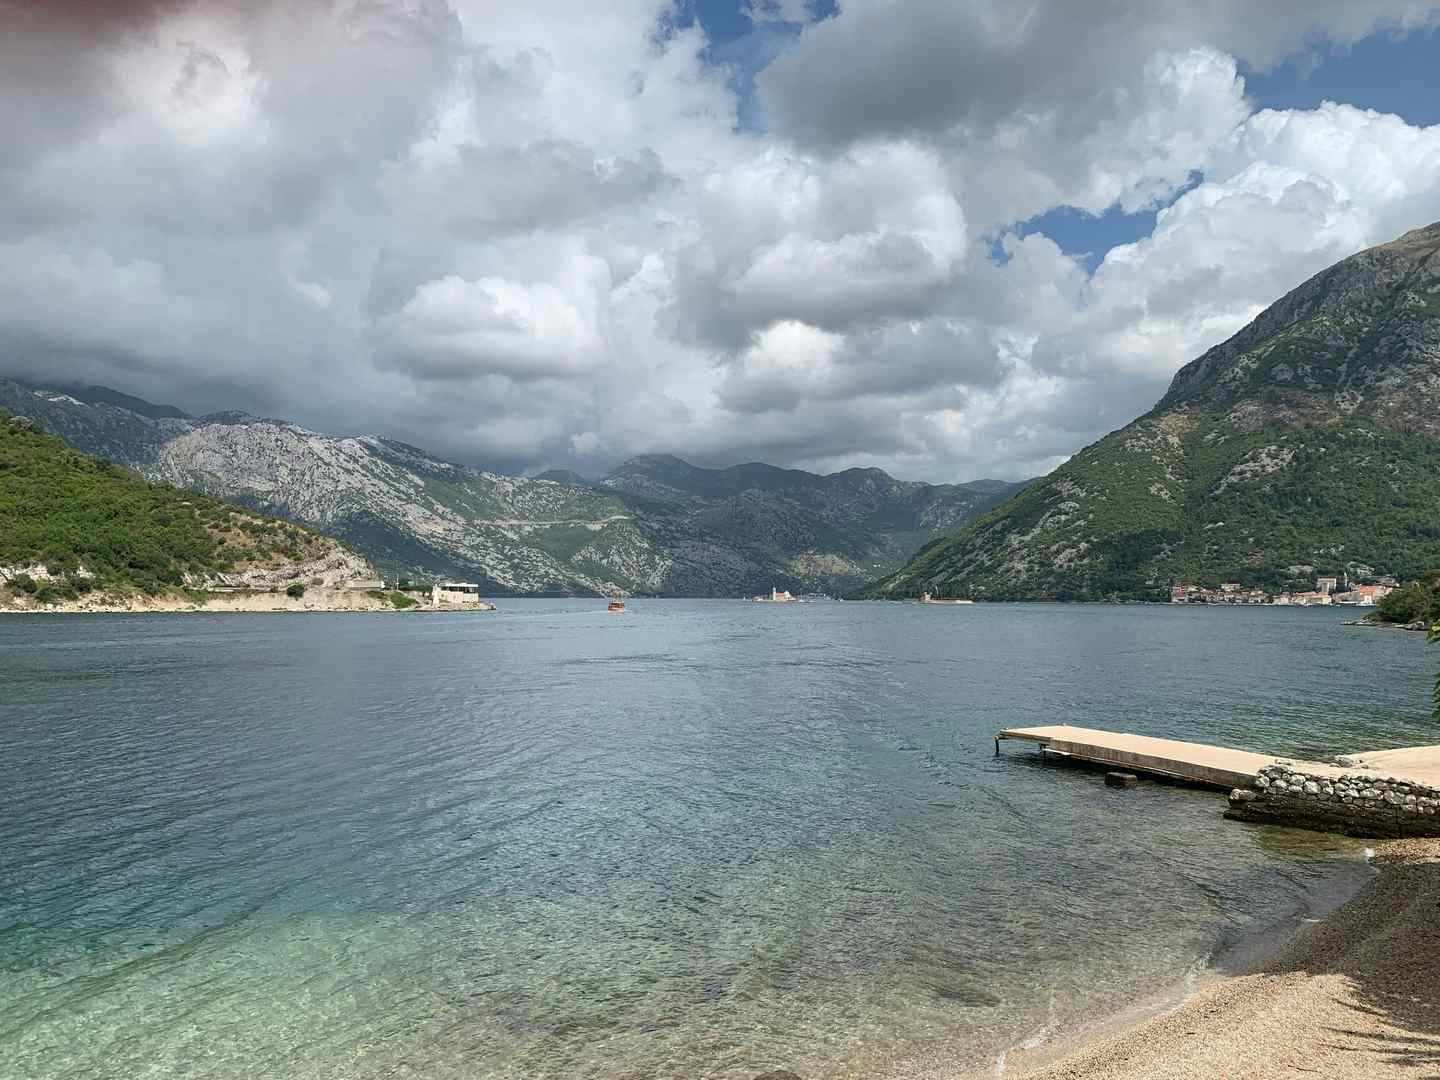 What an awesome week. Montenegro is beautif...